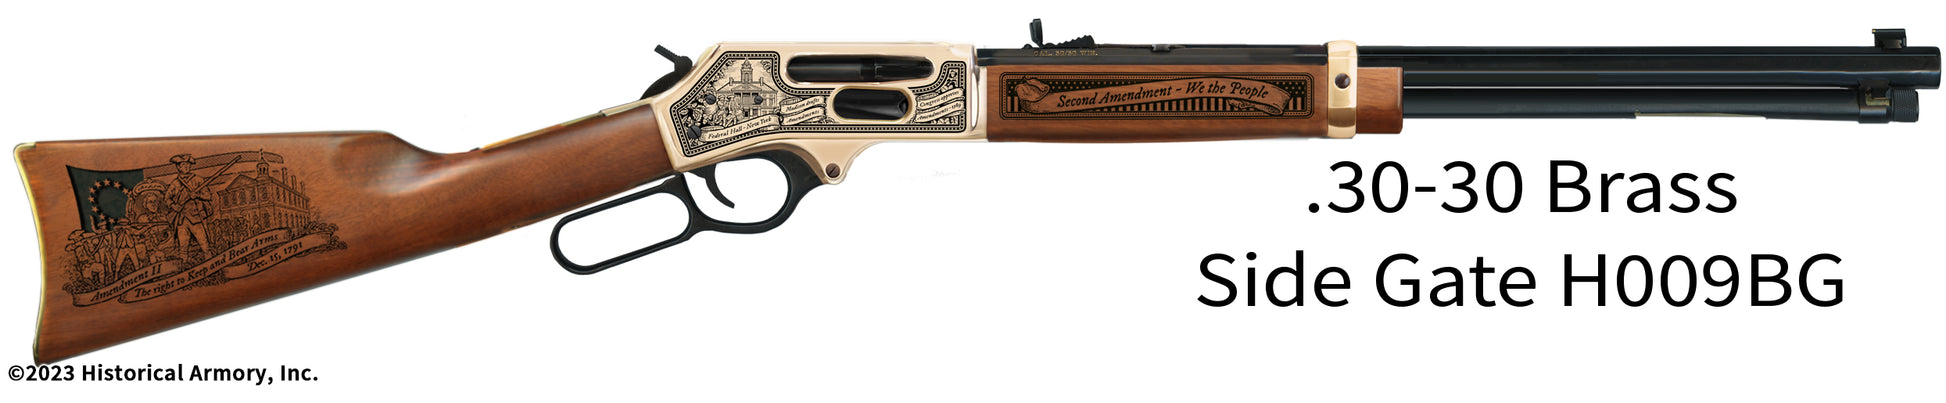 2nd Amendment Limited Edition Henry Brass Side Gate Engraved Rifle